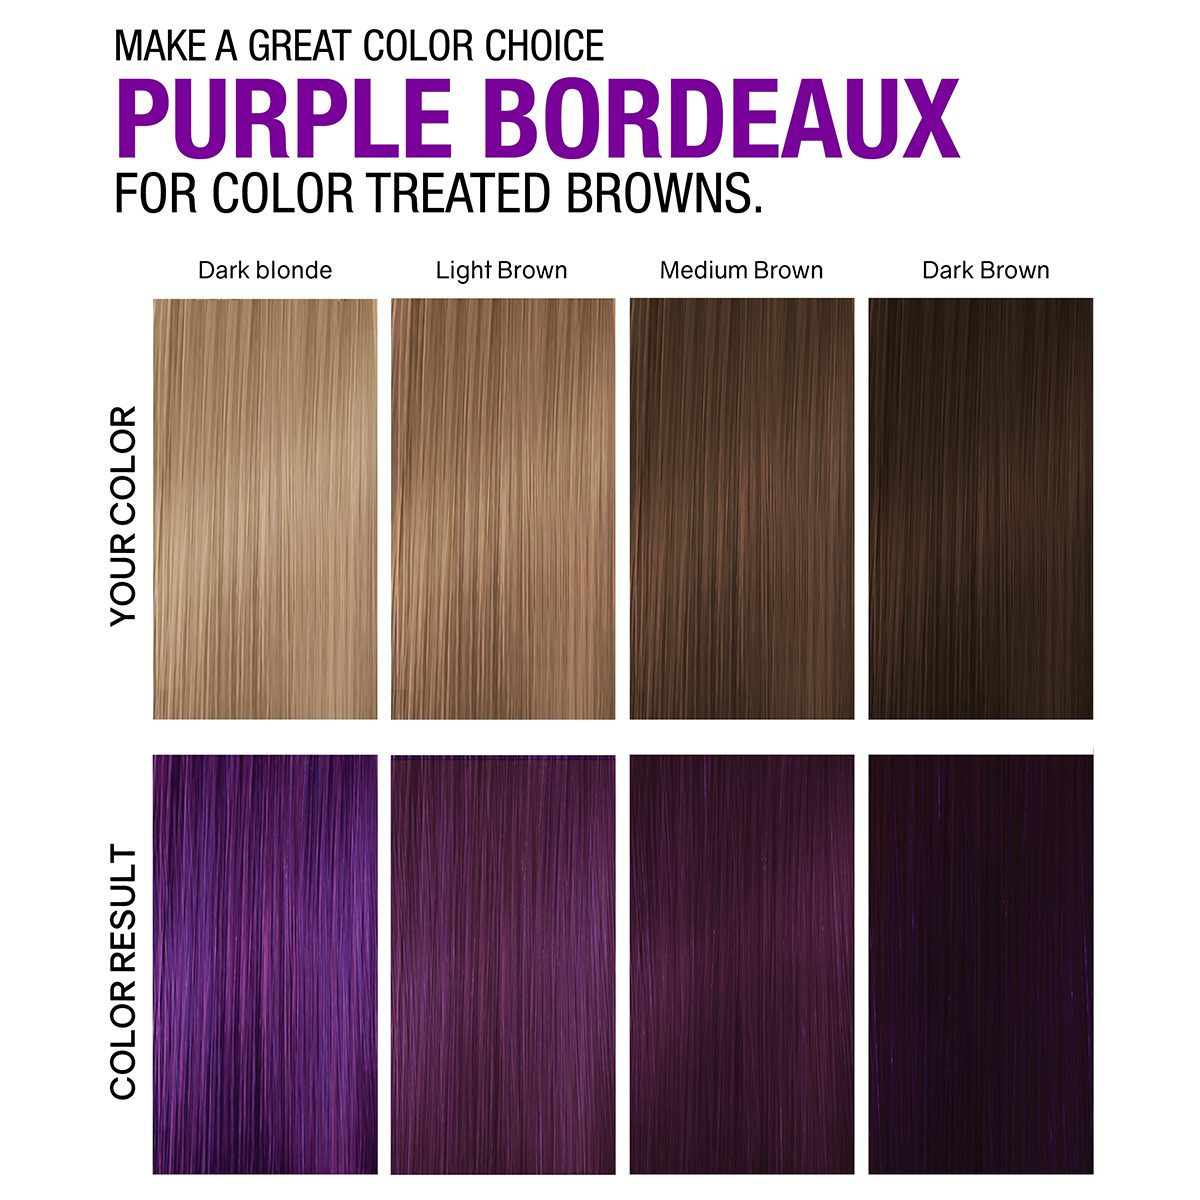 Purple Bordeaux for color treated browns.